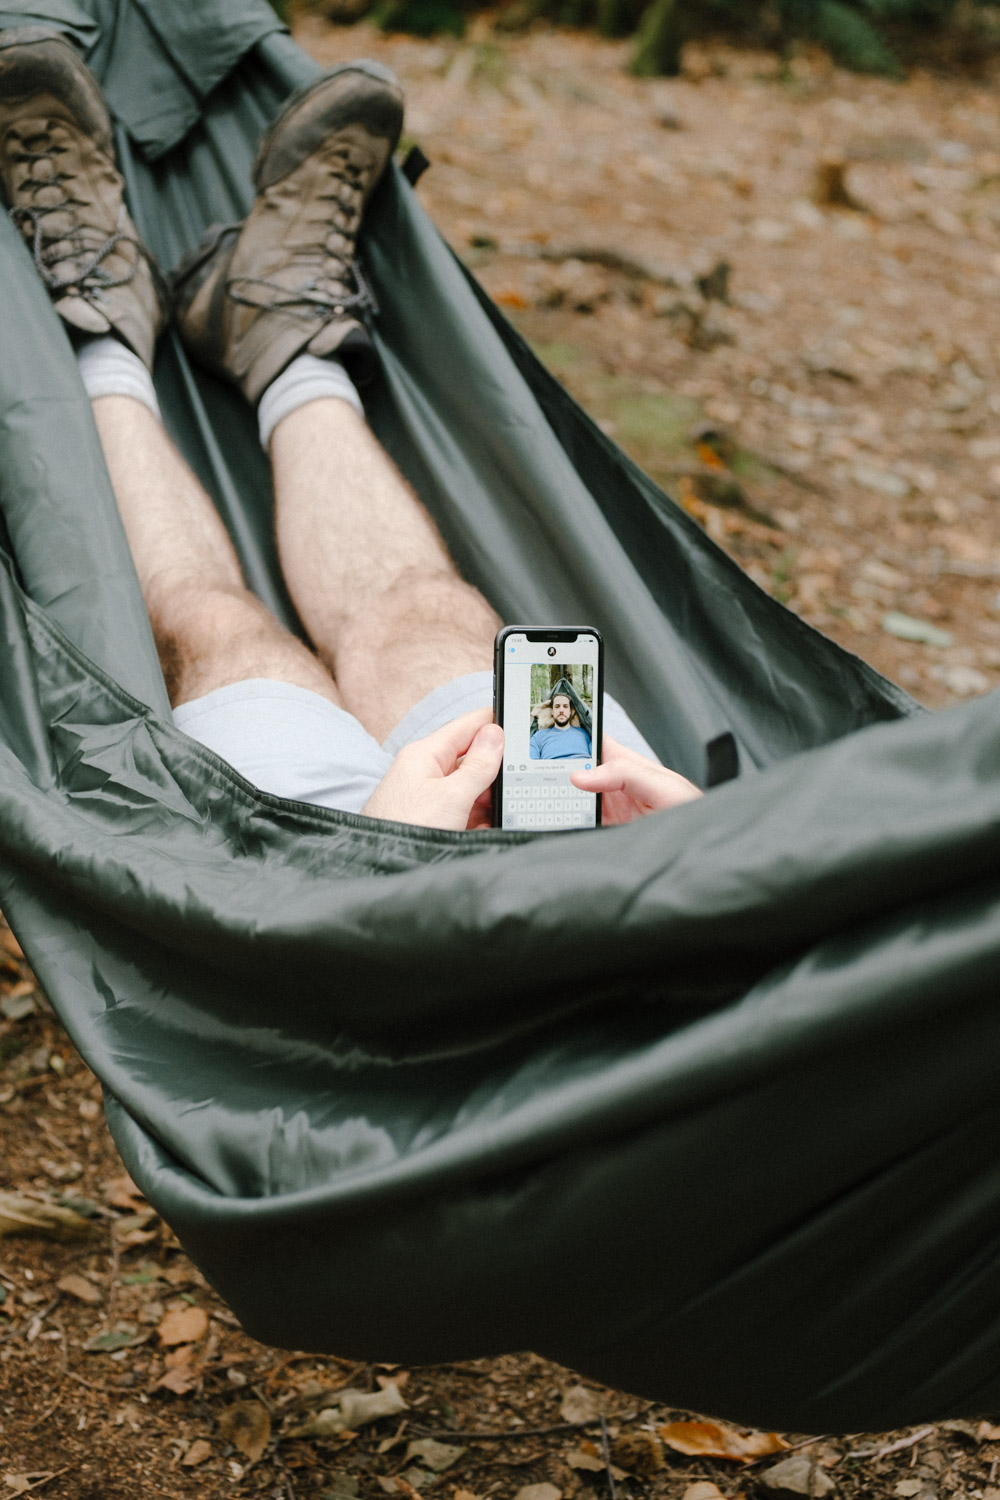 A pair of legs with walking boots on sitting in a hammock. The person is holding their phone up and is taking a selfie.